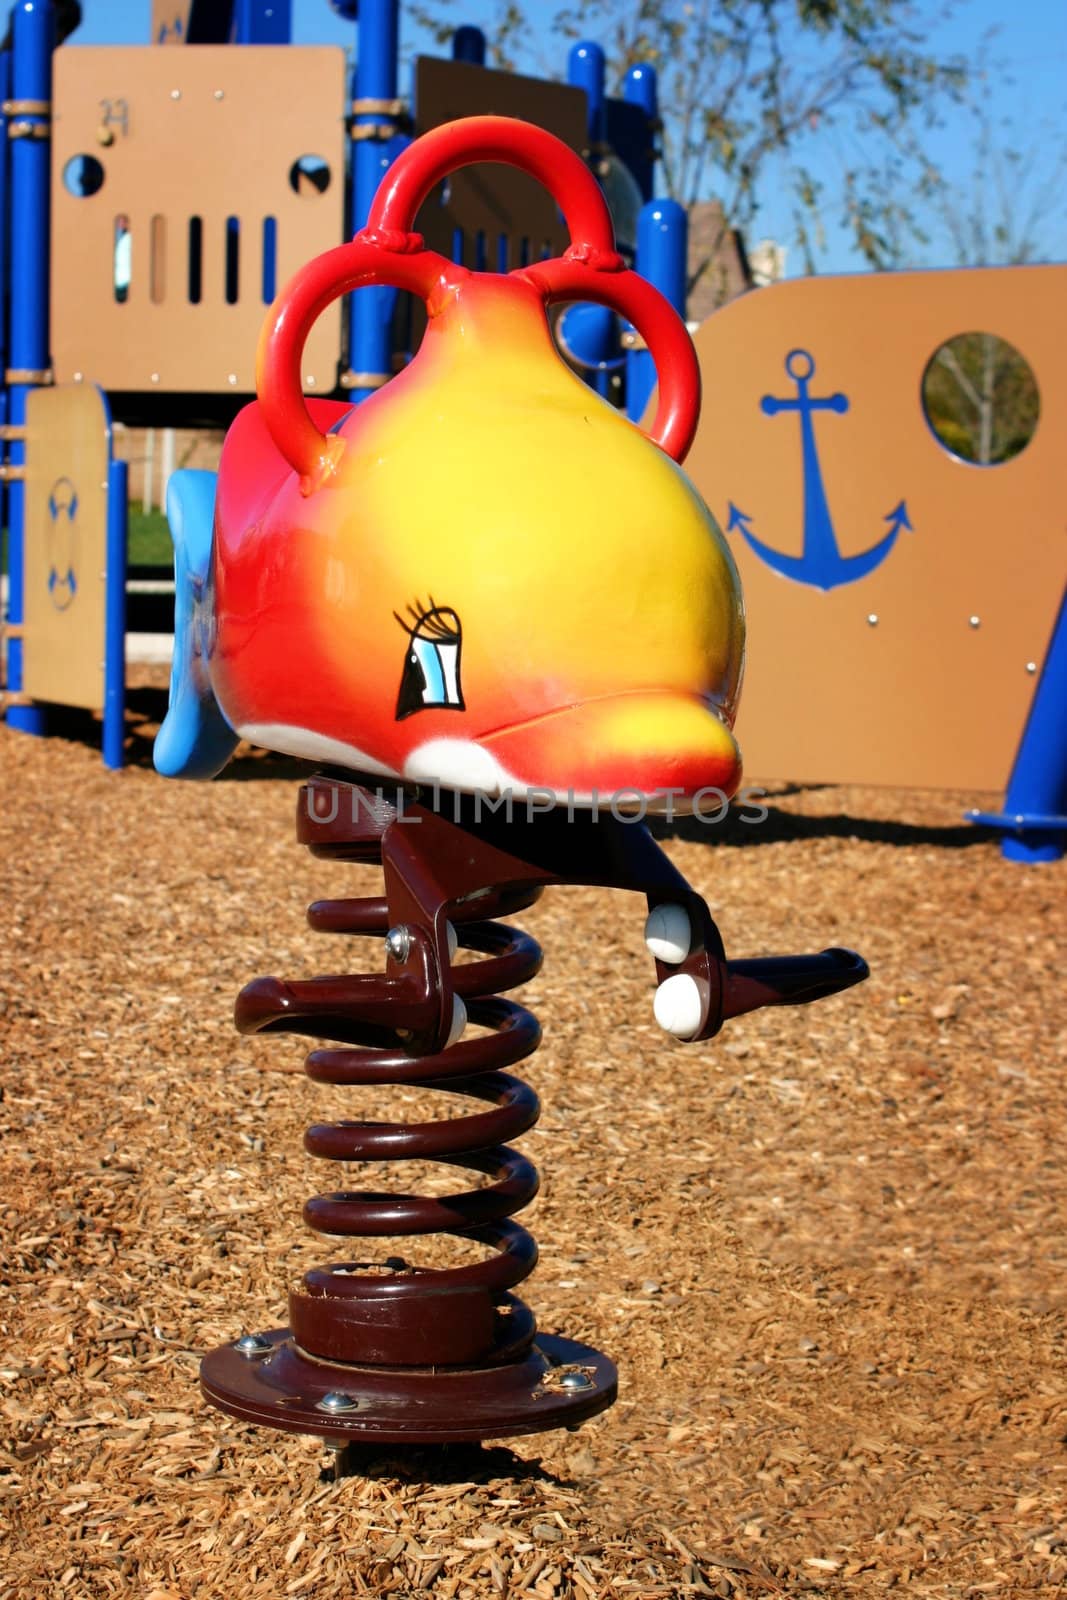 Colorful playground equipment with woodchips on the ground.